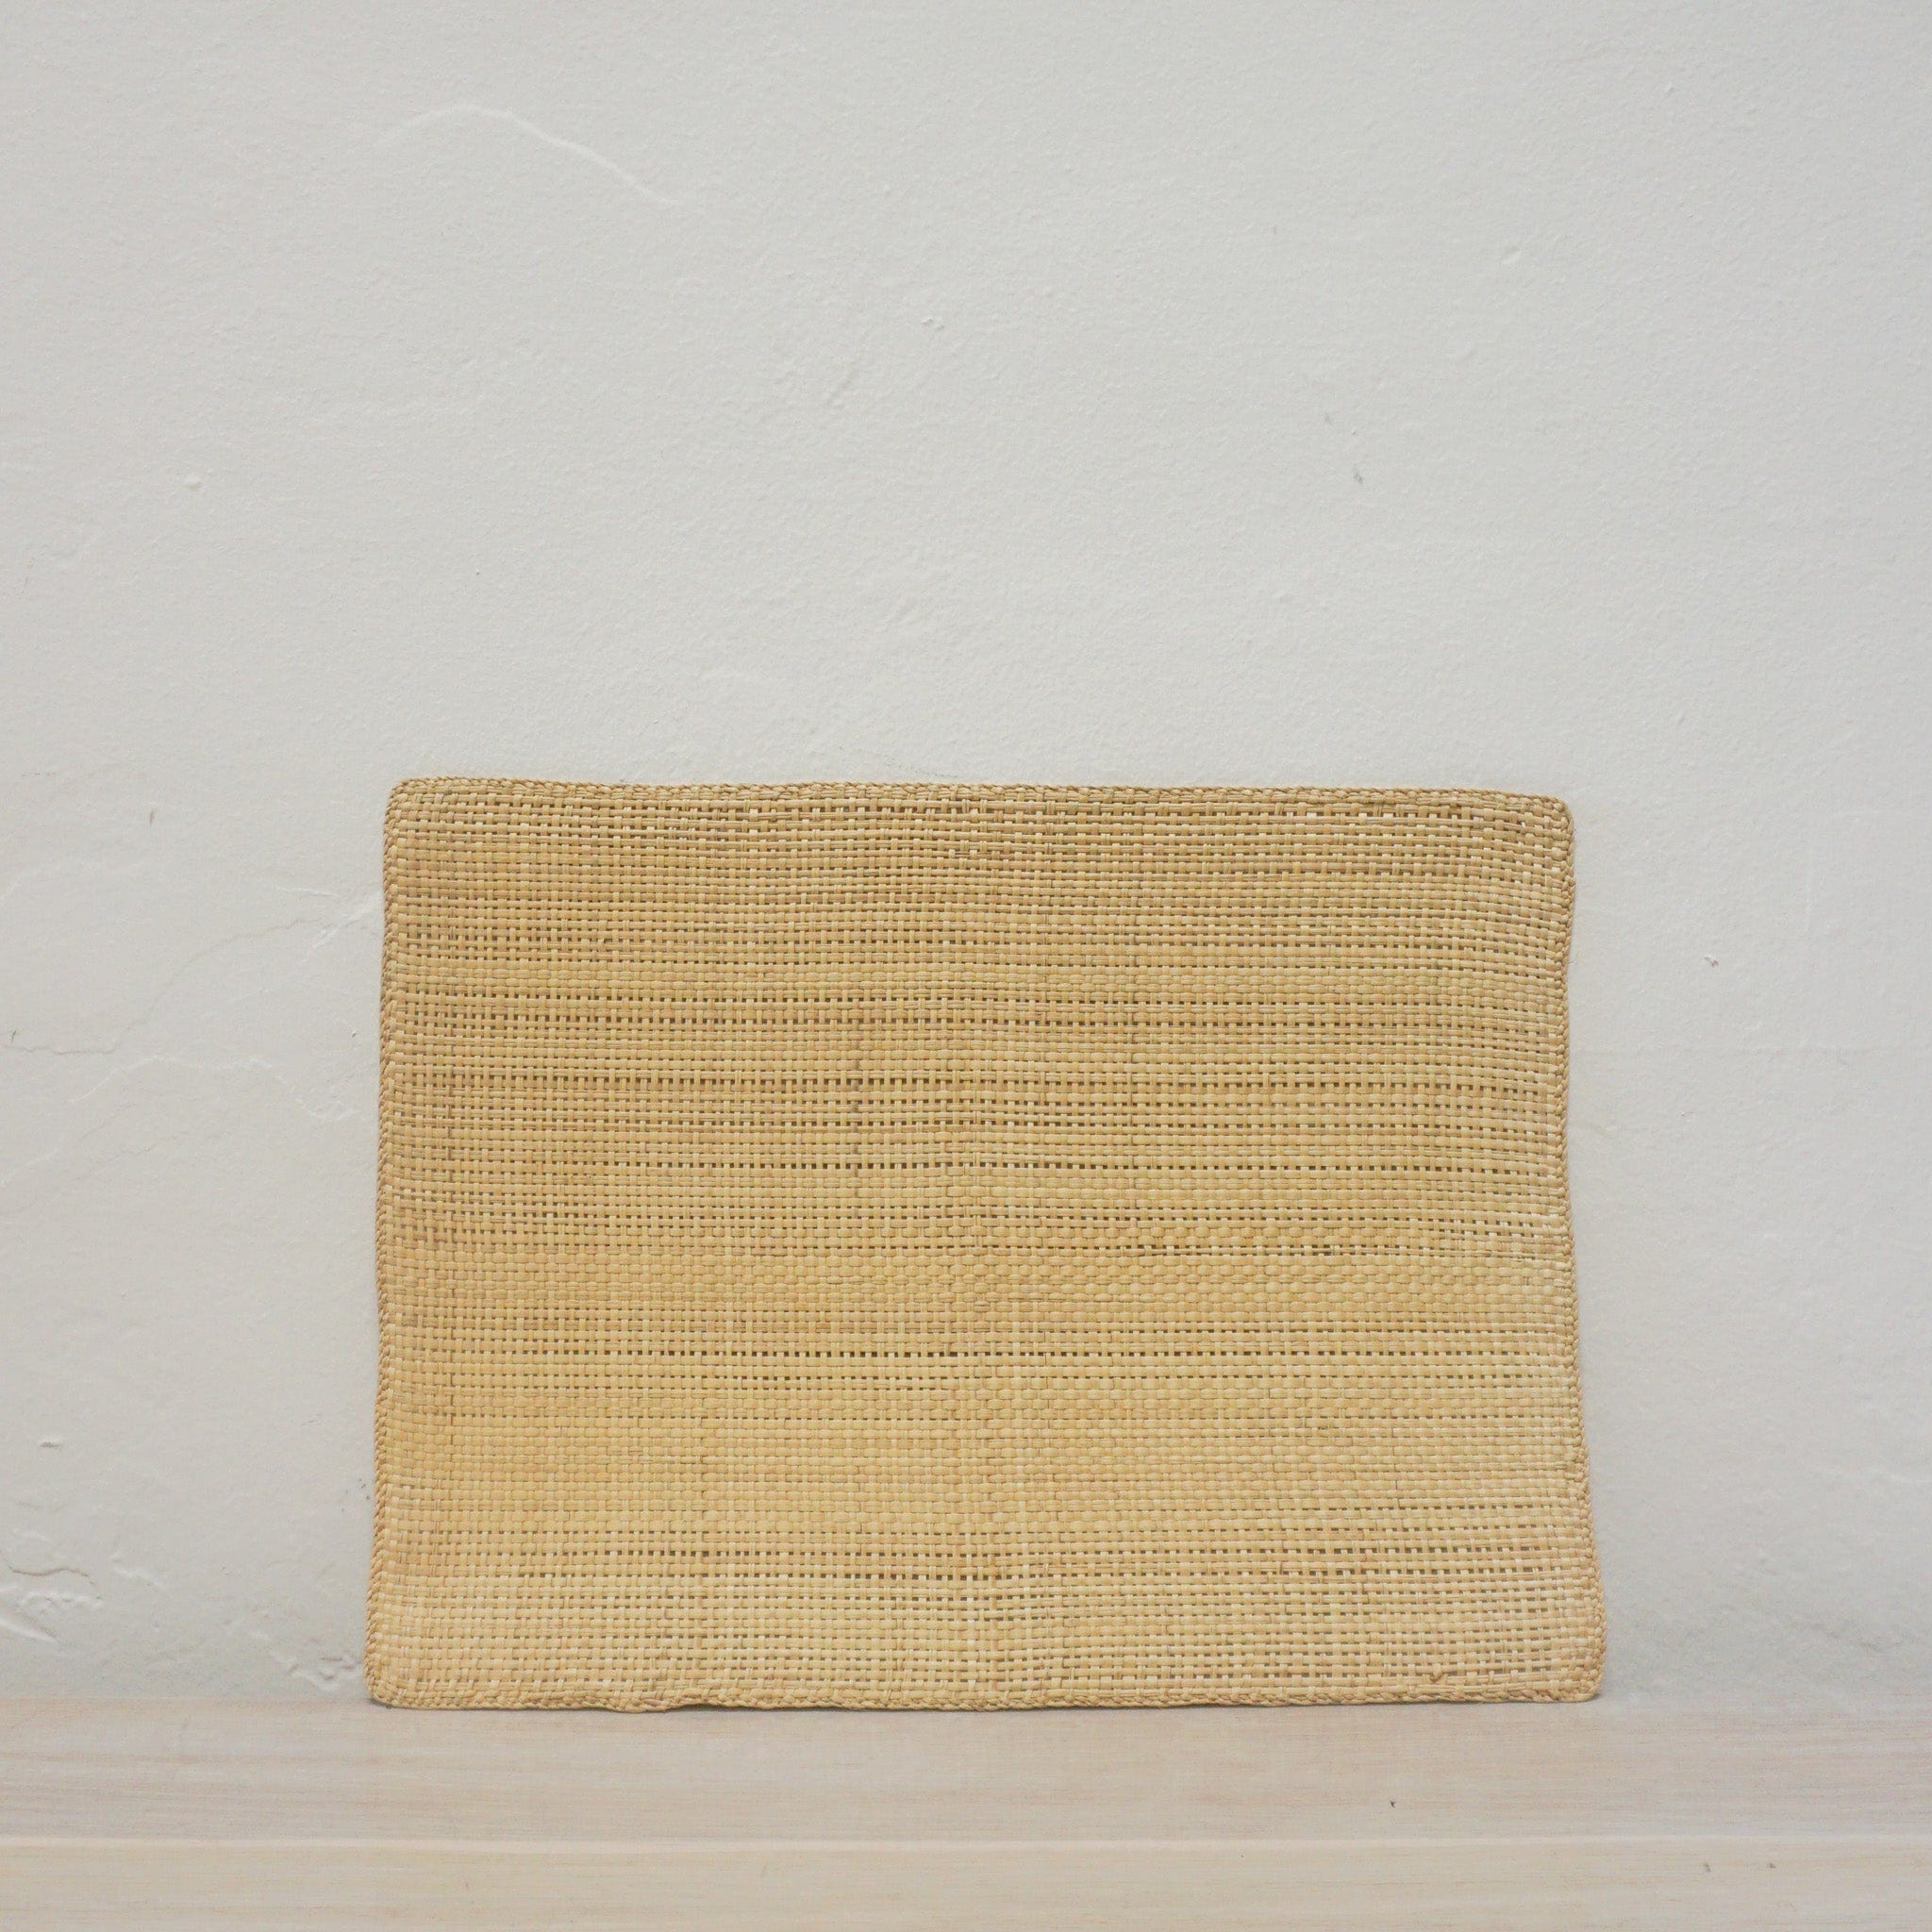 Guanabana Placemats Straw Placemat by Guanabana in Natural